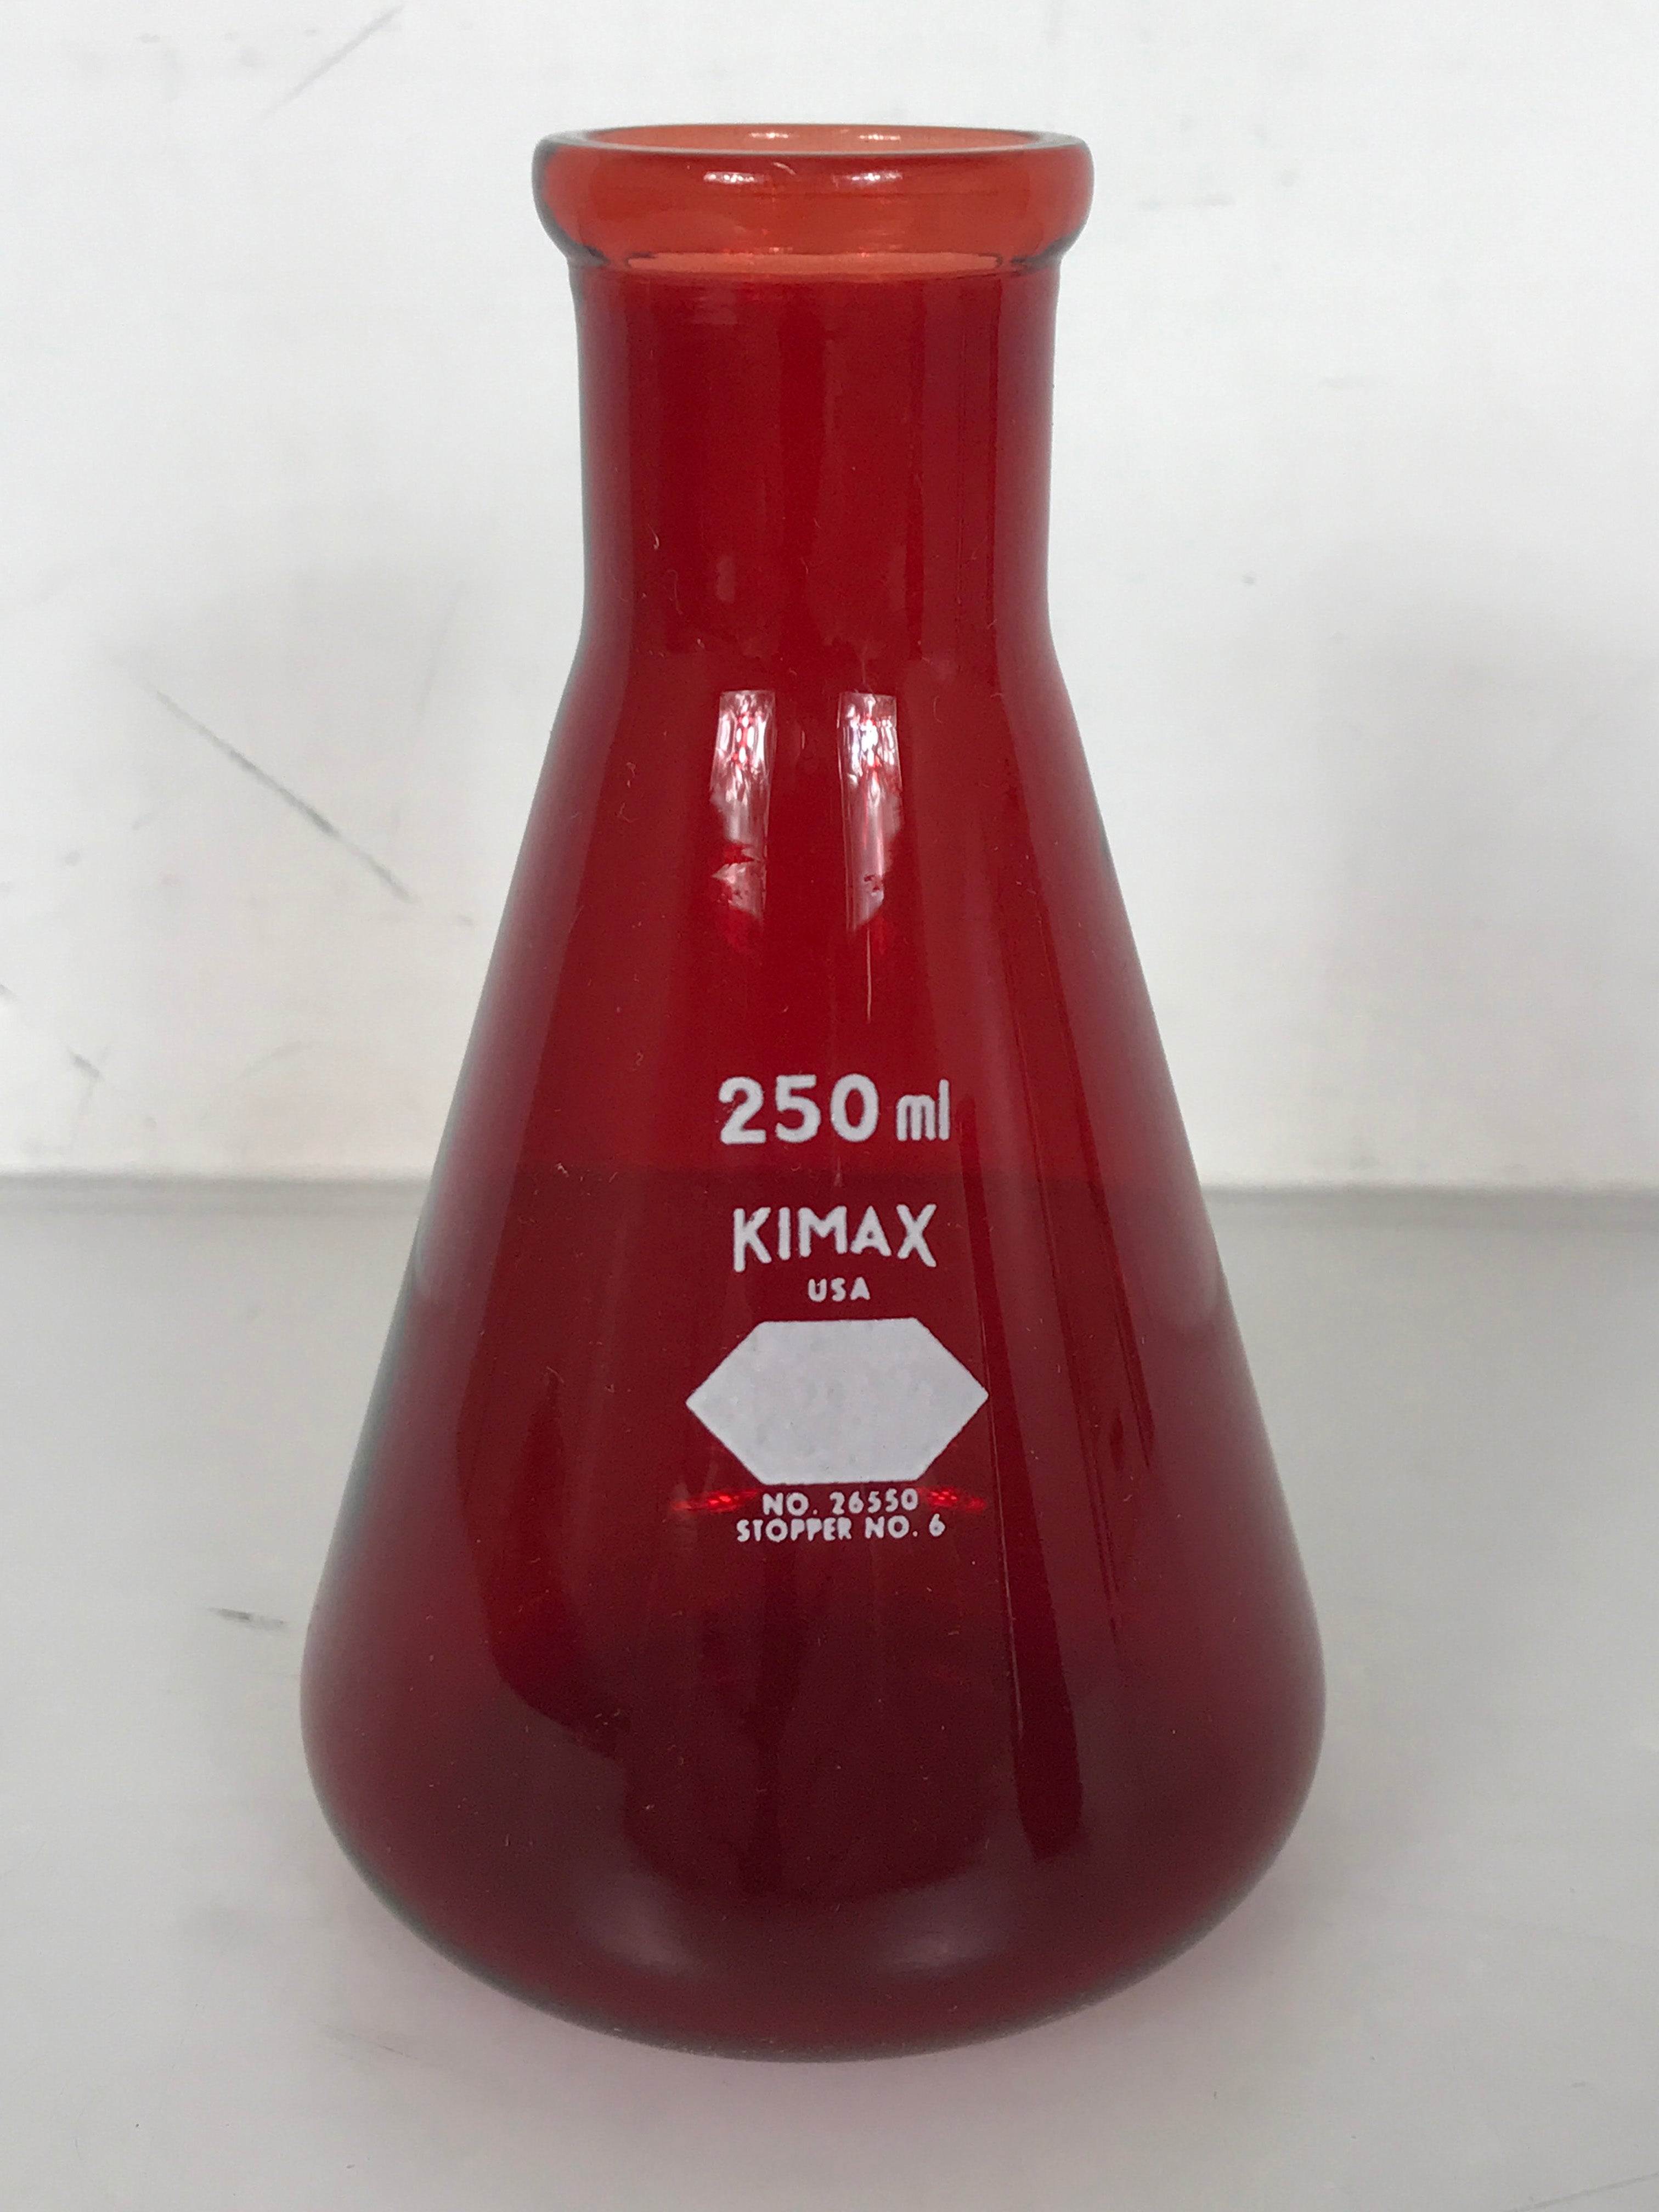 Kimax 250 mL Ruby Red Glass Erlenmeyer Flask No. 26550